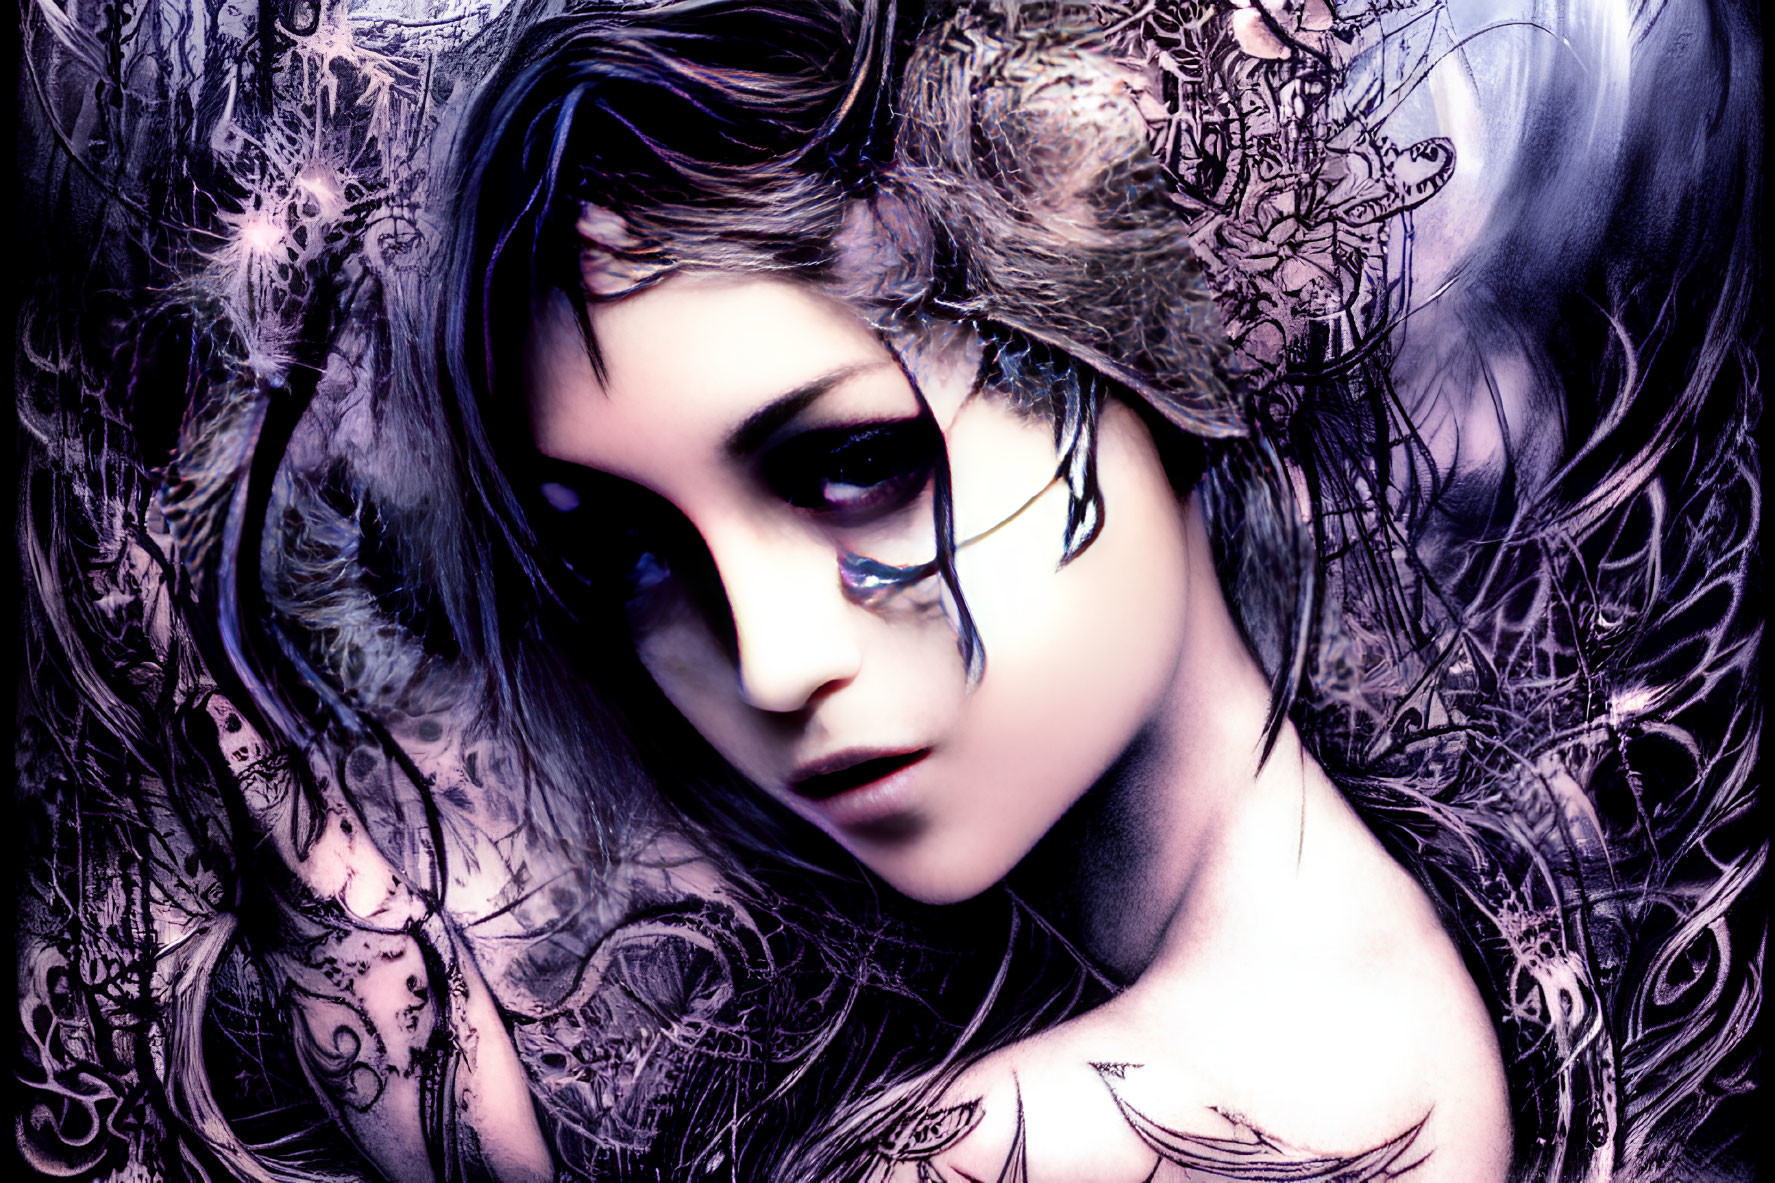 Digital Art: Woman with Striking Makeup and Tattoos in Mystical Blue Floral Setting